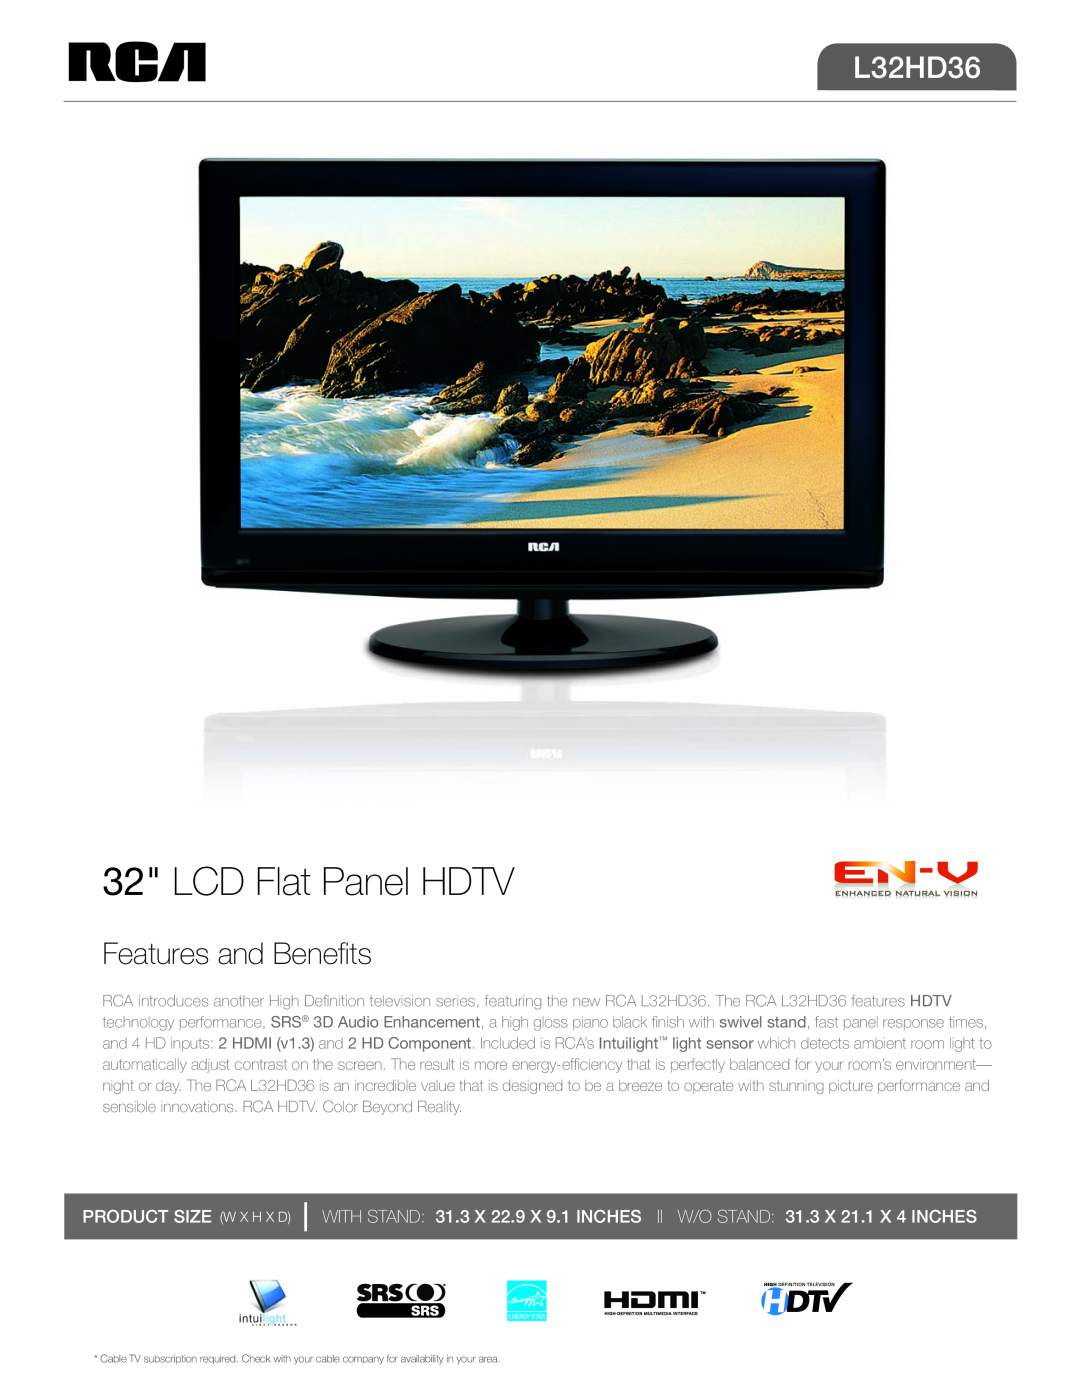 RCA L32HD36 manual LCD Flat Panel HDTV, Features and Benefits, Product Size W x H x D 